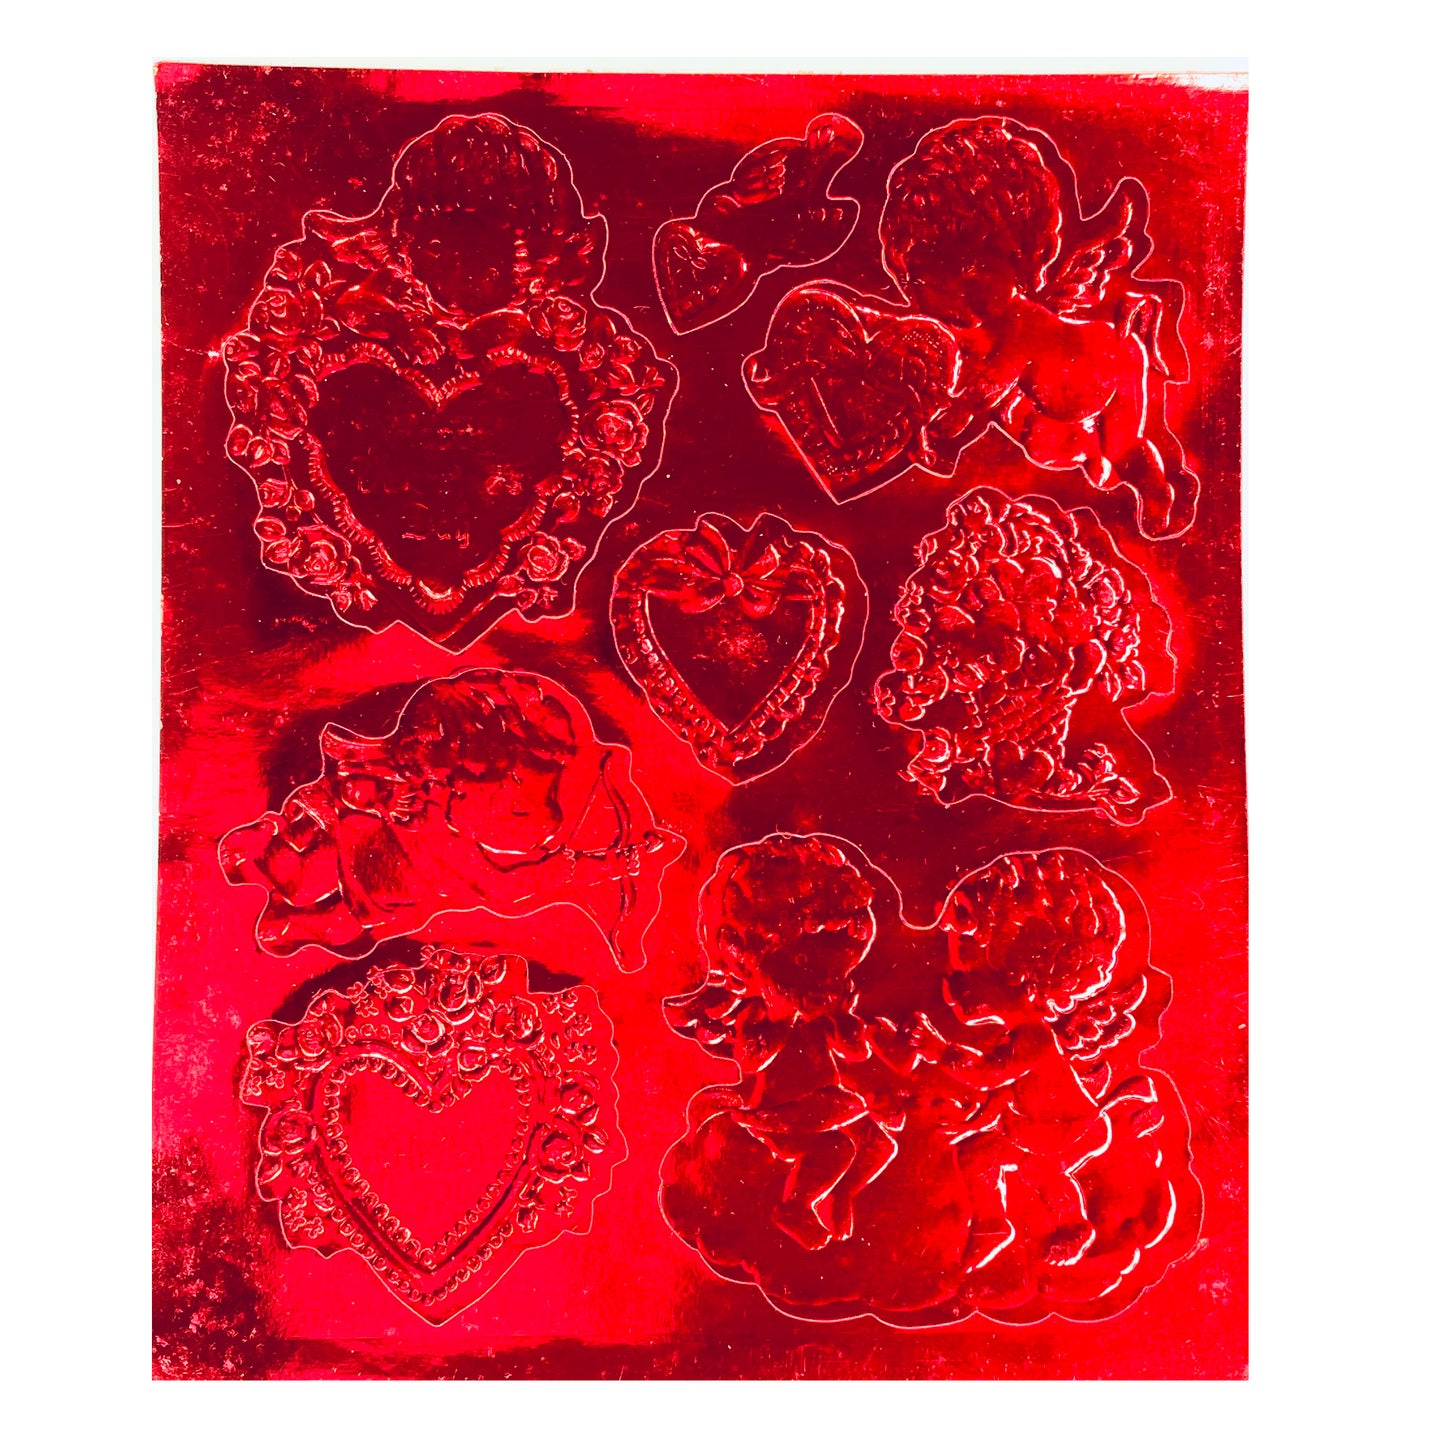 Red Foil Heart Stickers - 775749206197